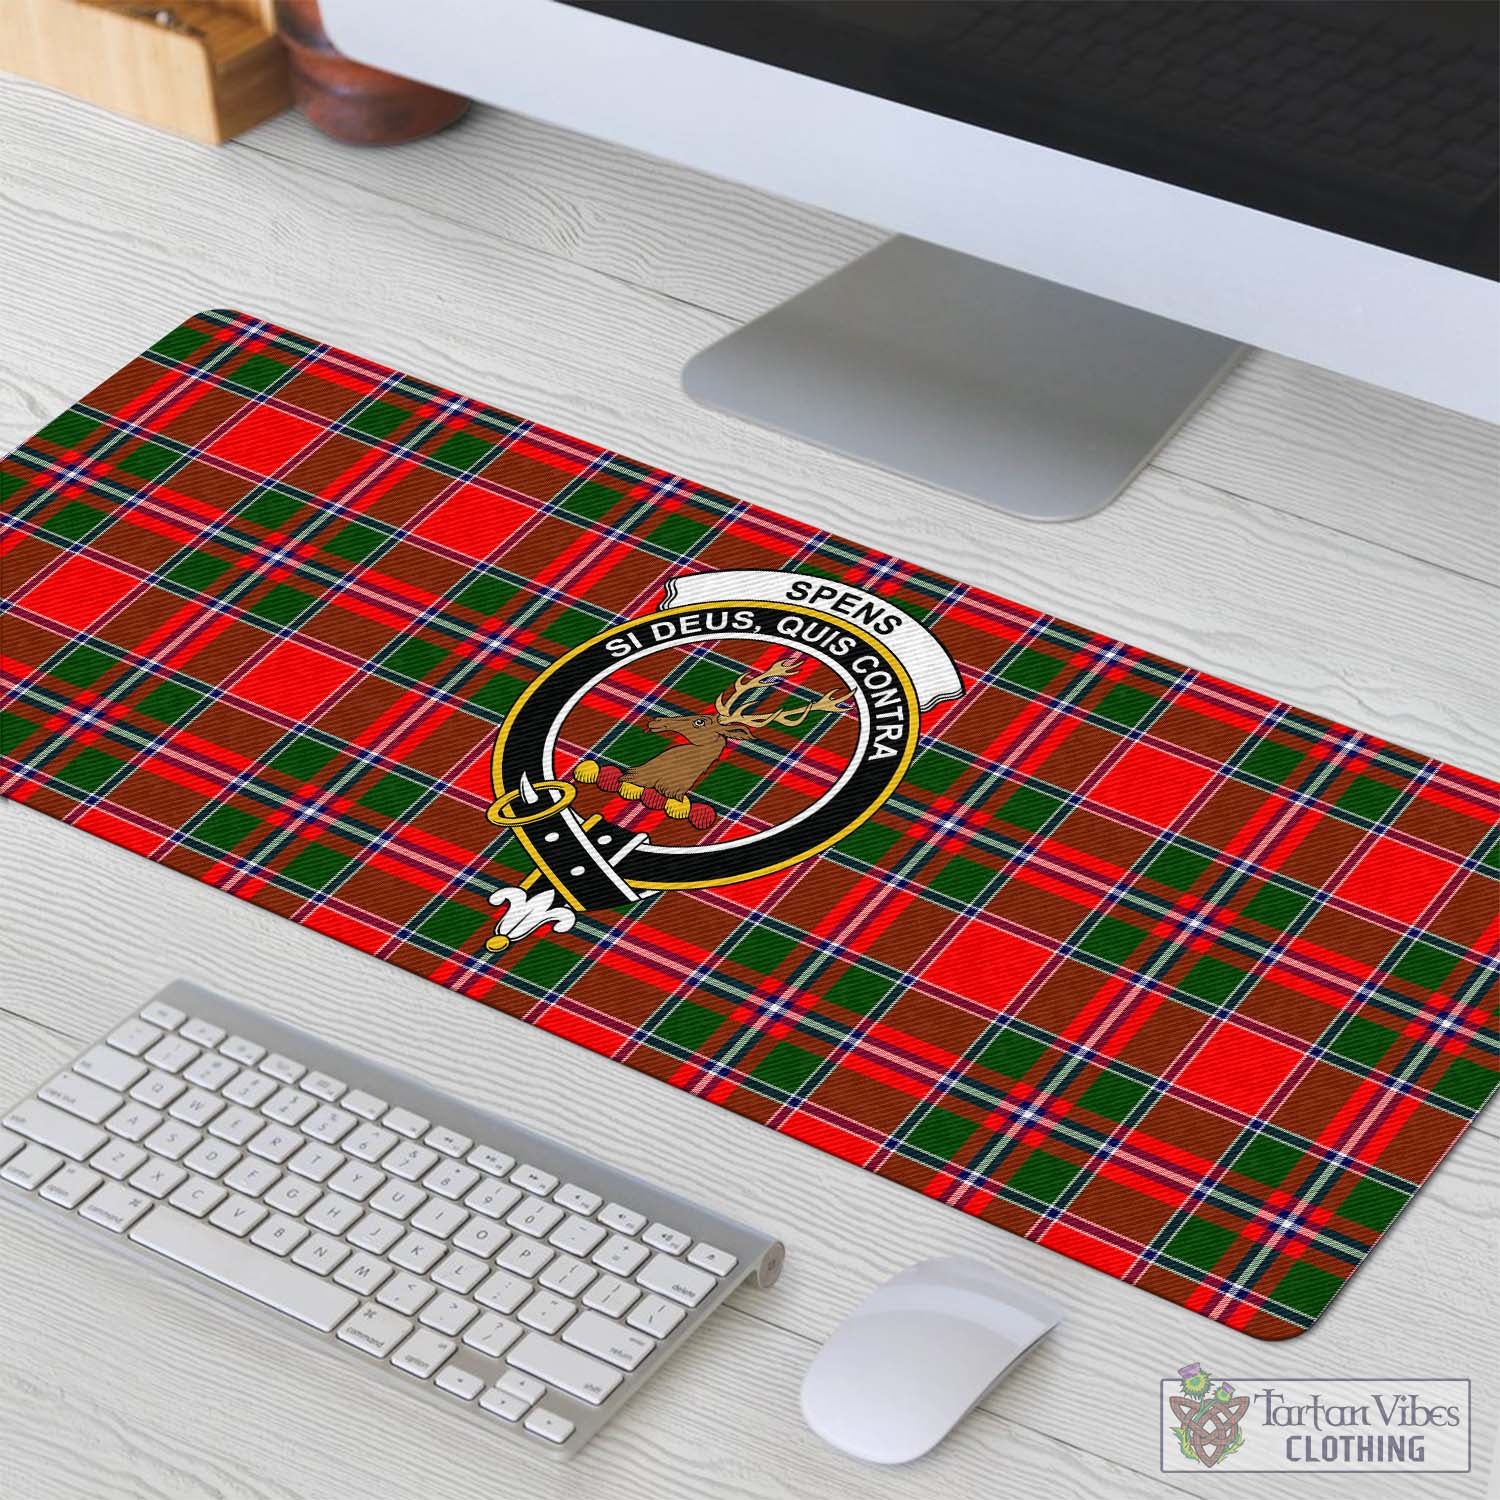 Tartan Vibes Clothing Spens Modern Tartan Mouse Pad with Family Crest